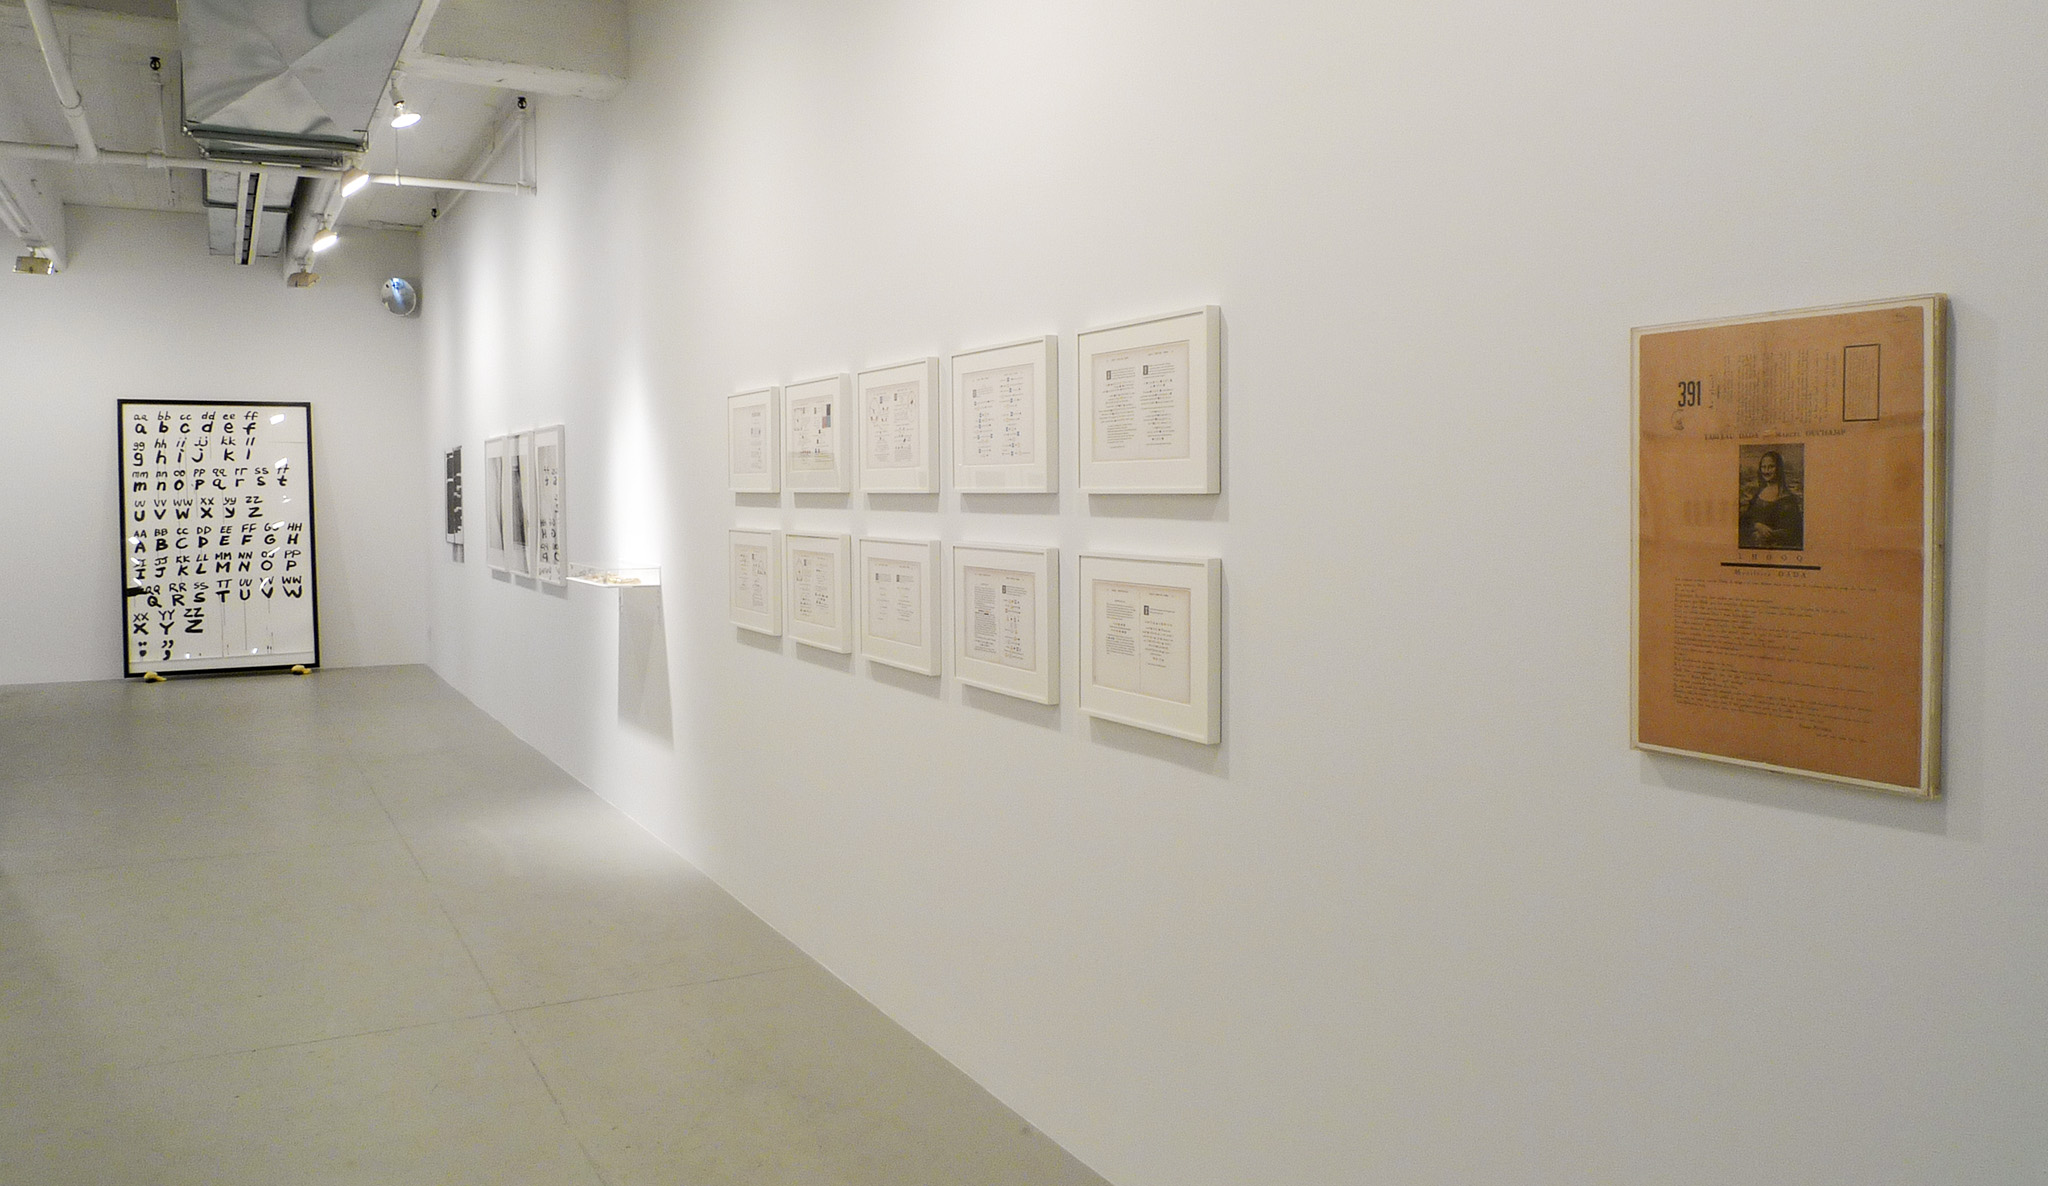 Carnal Knowledge Installation View 3